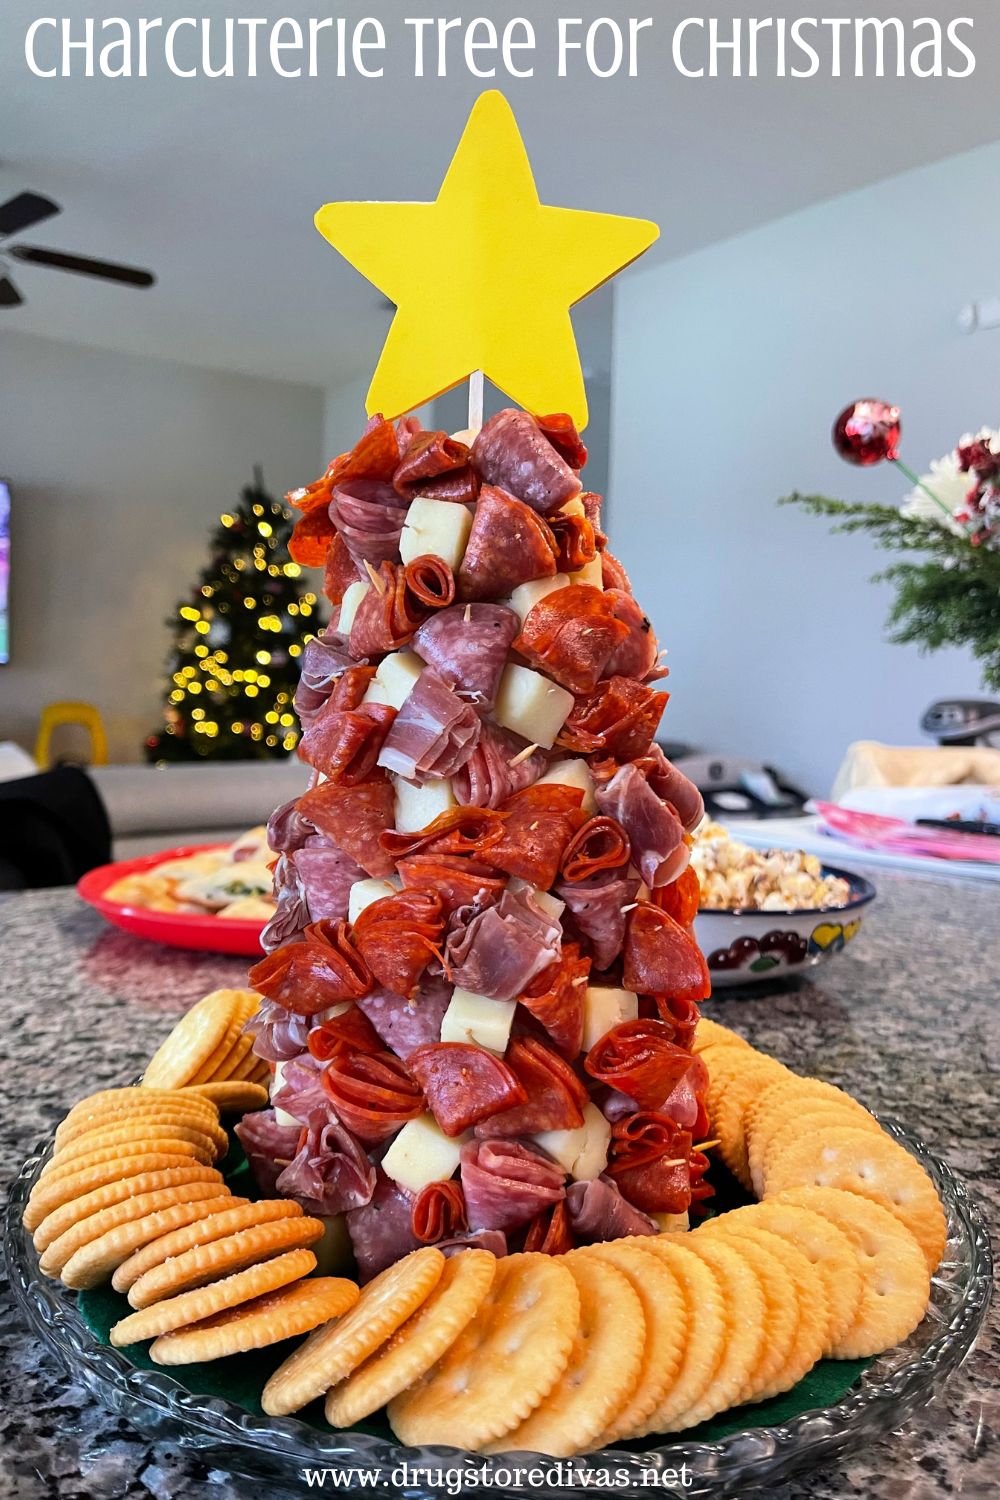 A tree filled with cheese and meat, surrounded by Ritz crackers, with a star on top and the words 